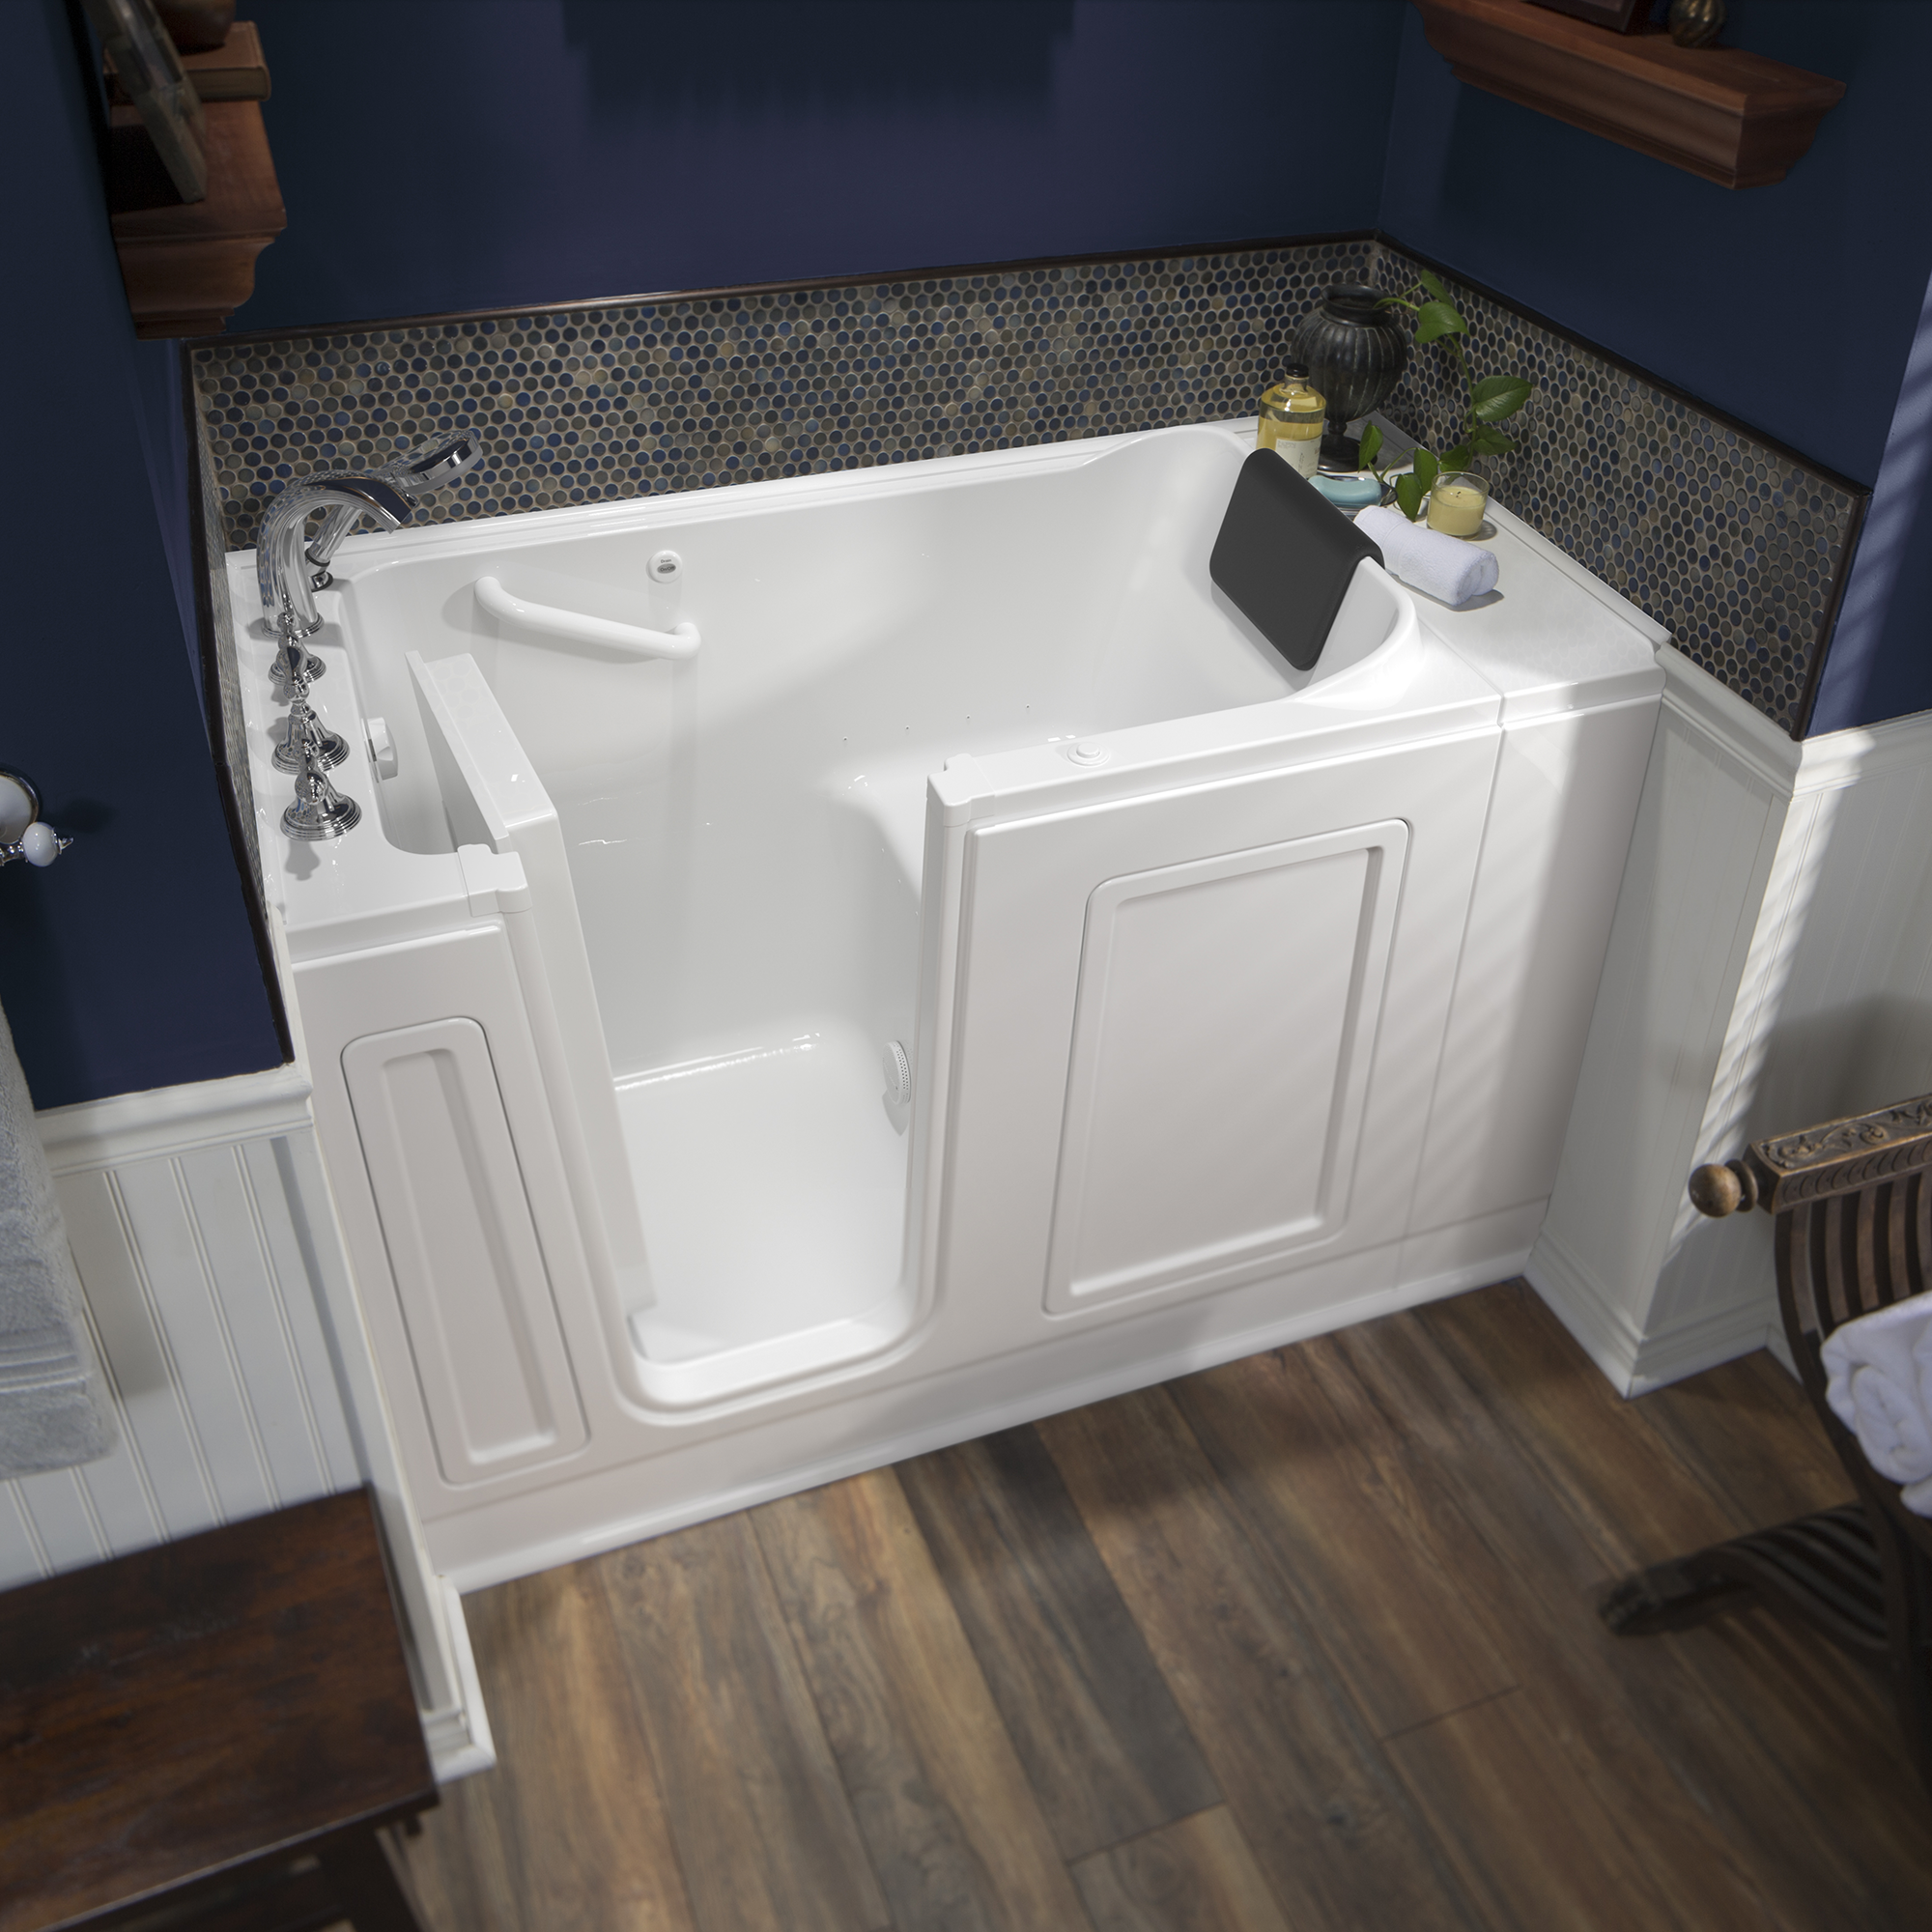 Acrylic Luxury Series 30 x 51 -Inch Walk-in Tub With Air Spa System - Left-Hand Drain With Faucet